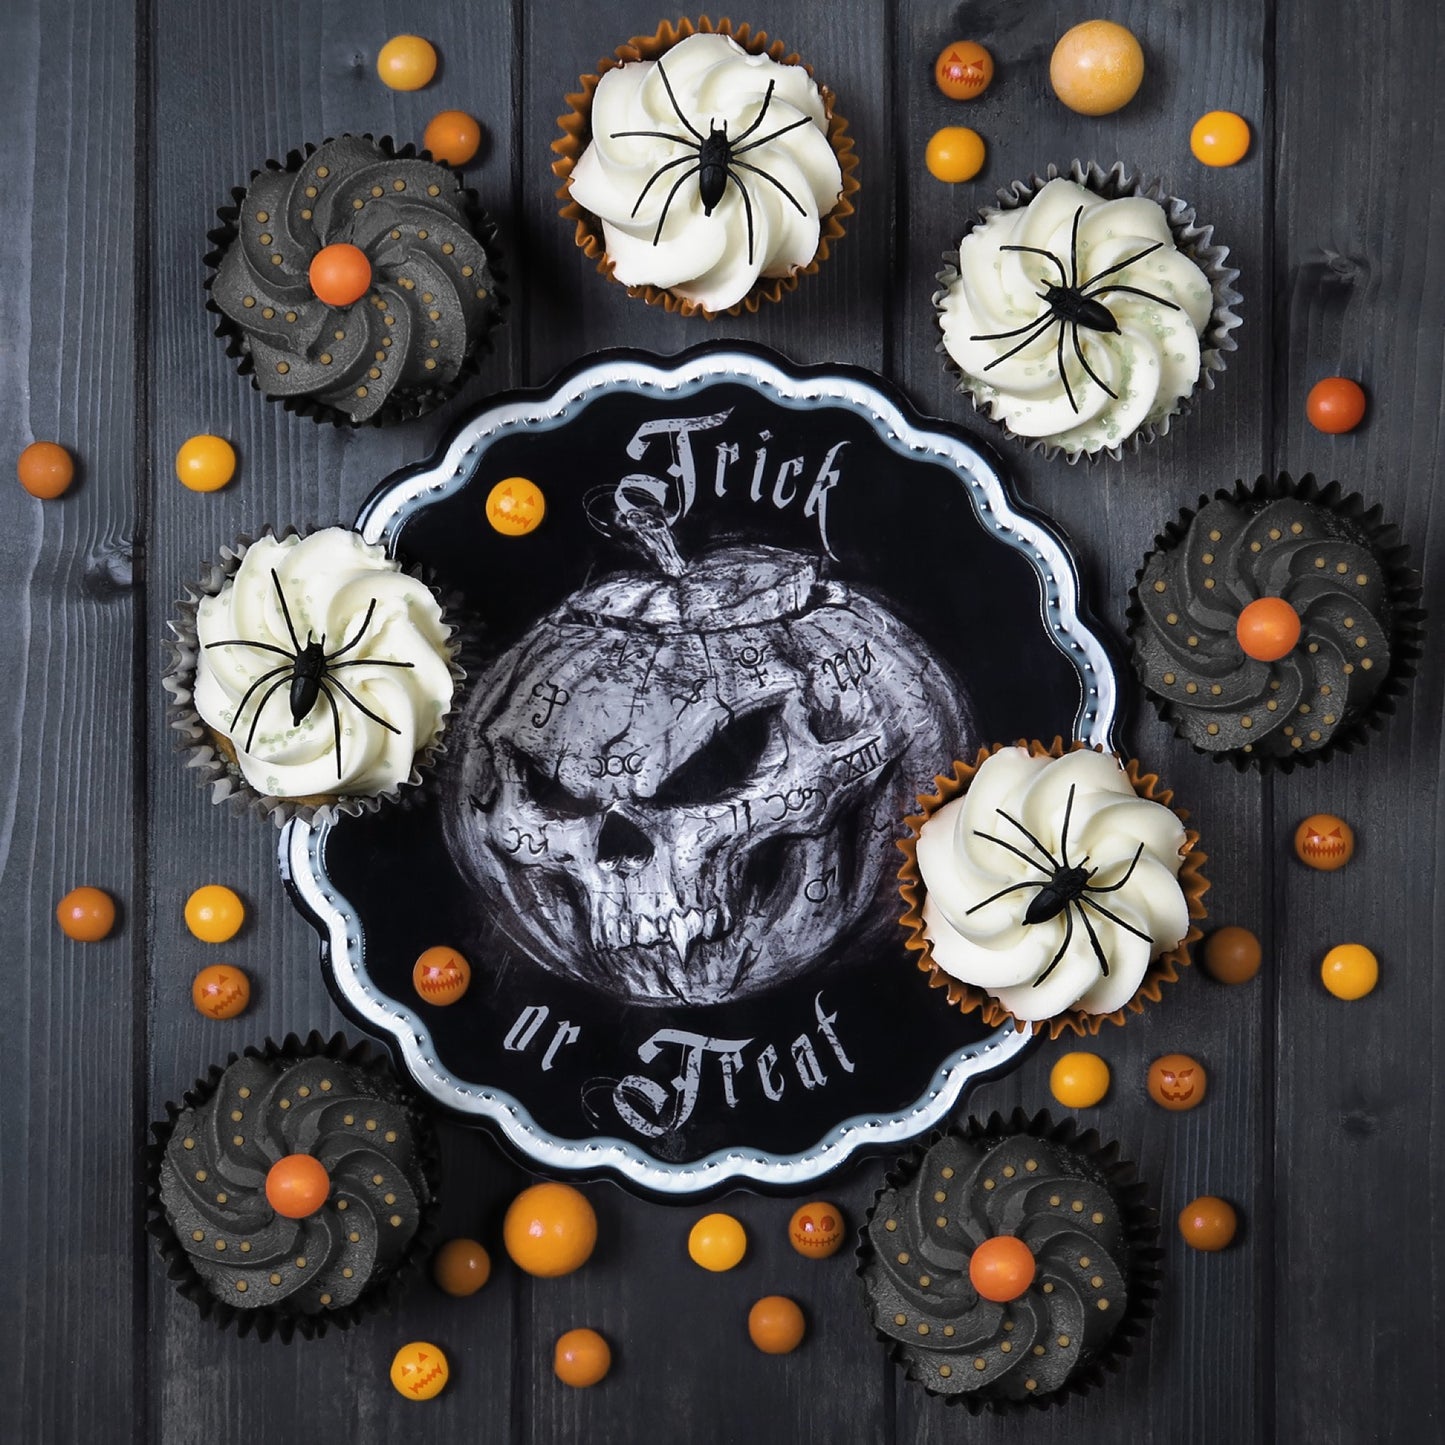 This 'Trick or Treat' trivet/serving plate is not just for Halloween. Display treats all year round on this darkly beautiful piece. Always be at the ready with spooks and shocks with this ghoulish serving plate! Hide the design beneath your favourite cake and once eaten this surprise pumpkin skull artwork will be the talking point amongst your friends and family.